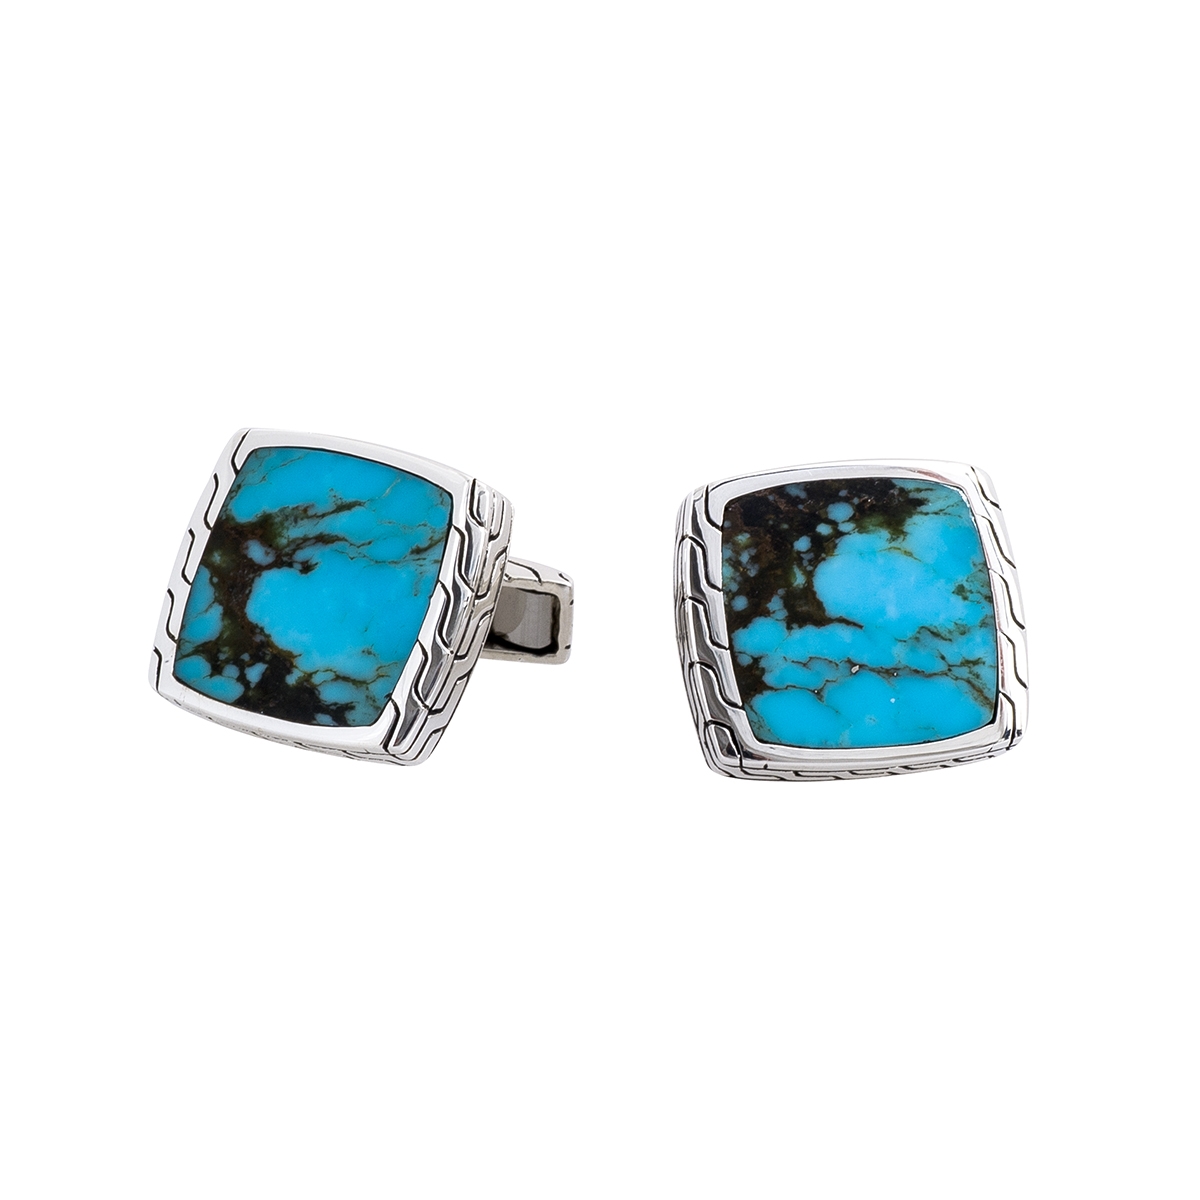 Silver cushion-shaped stud earrings set with turquoise.